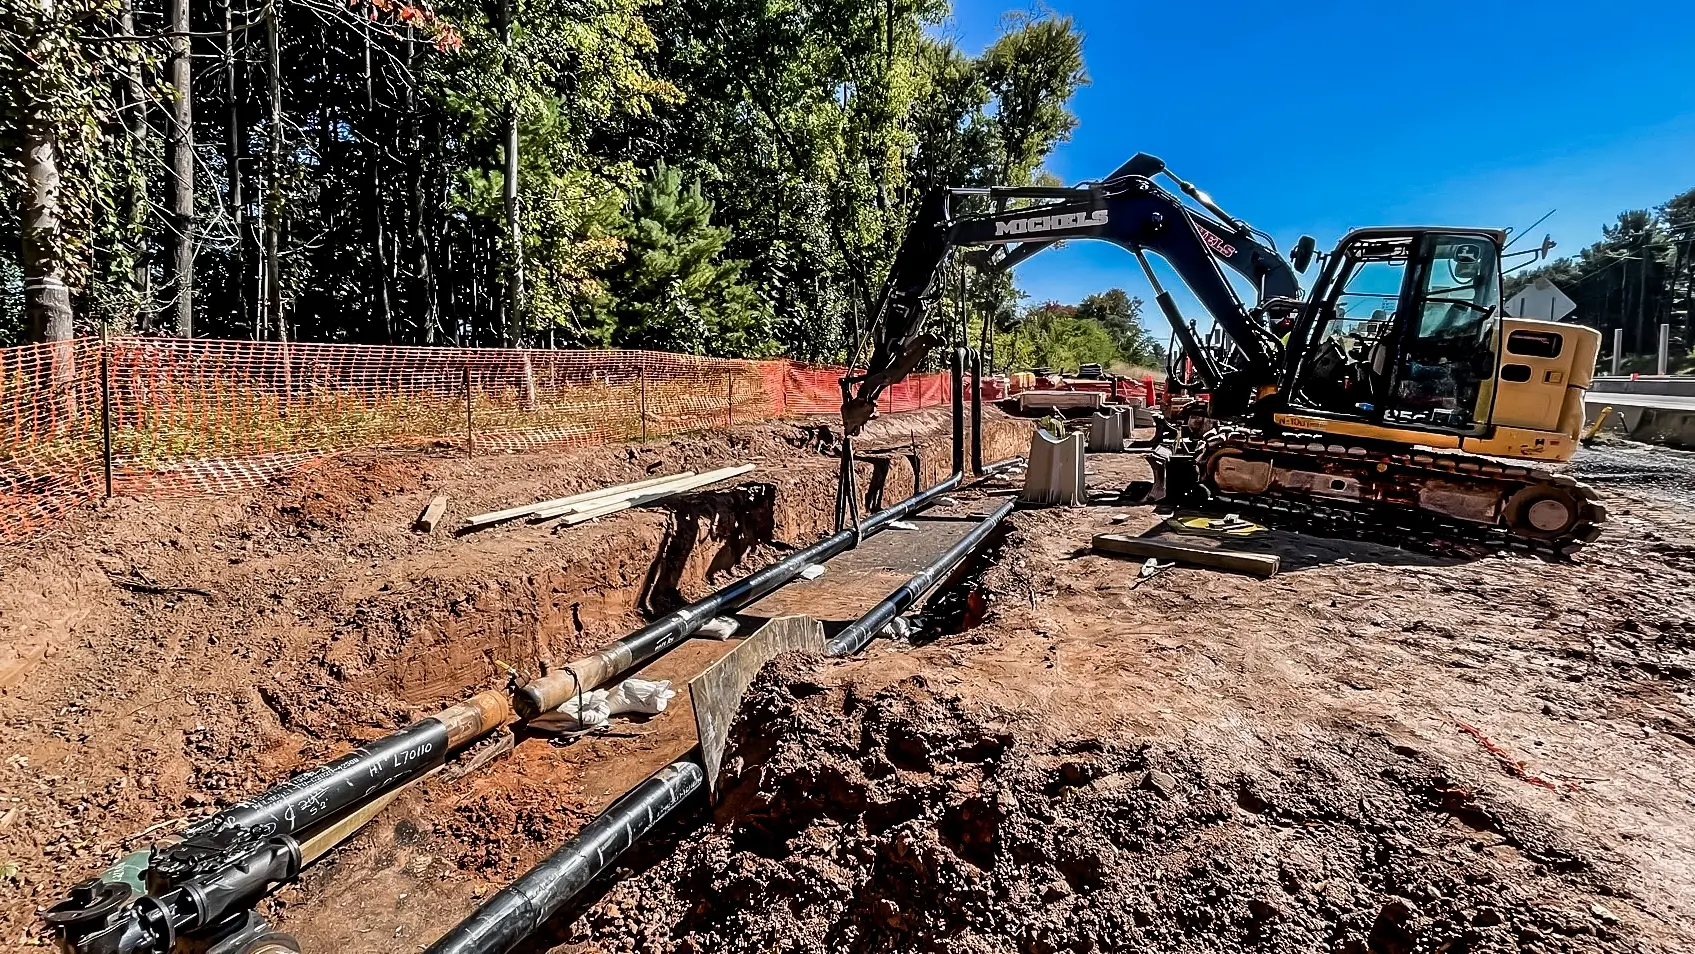 Small excavators perform line lowering of a pipeline into a trench.